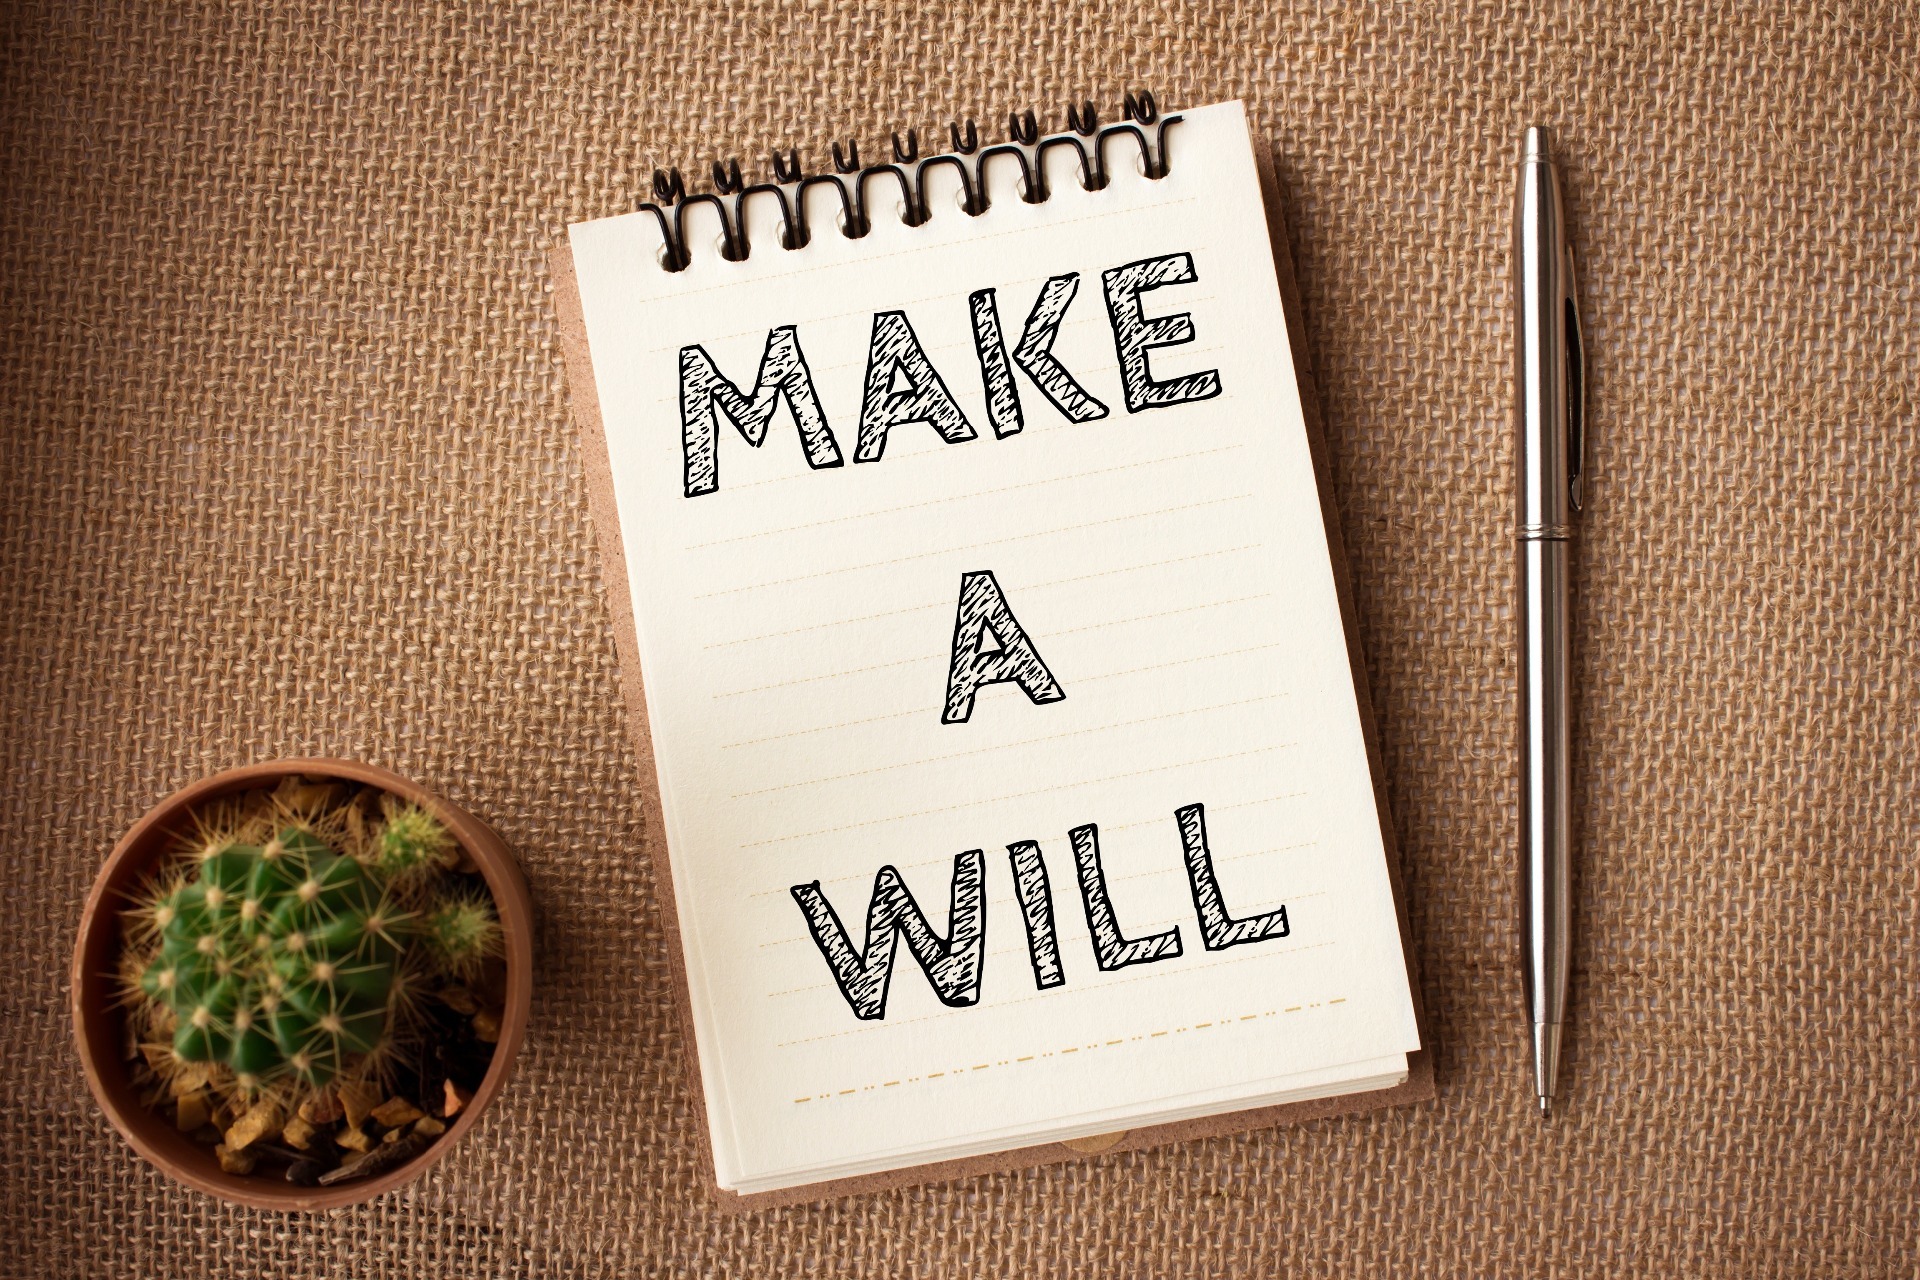 A notepad, with "Make a Will" written on.  Our Solicitors for Wills can assist with writing a Will, from £175 plus VAT.  Complete the Contact us box or click on this image to pass through to our Wills page.